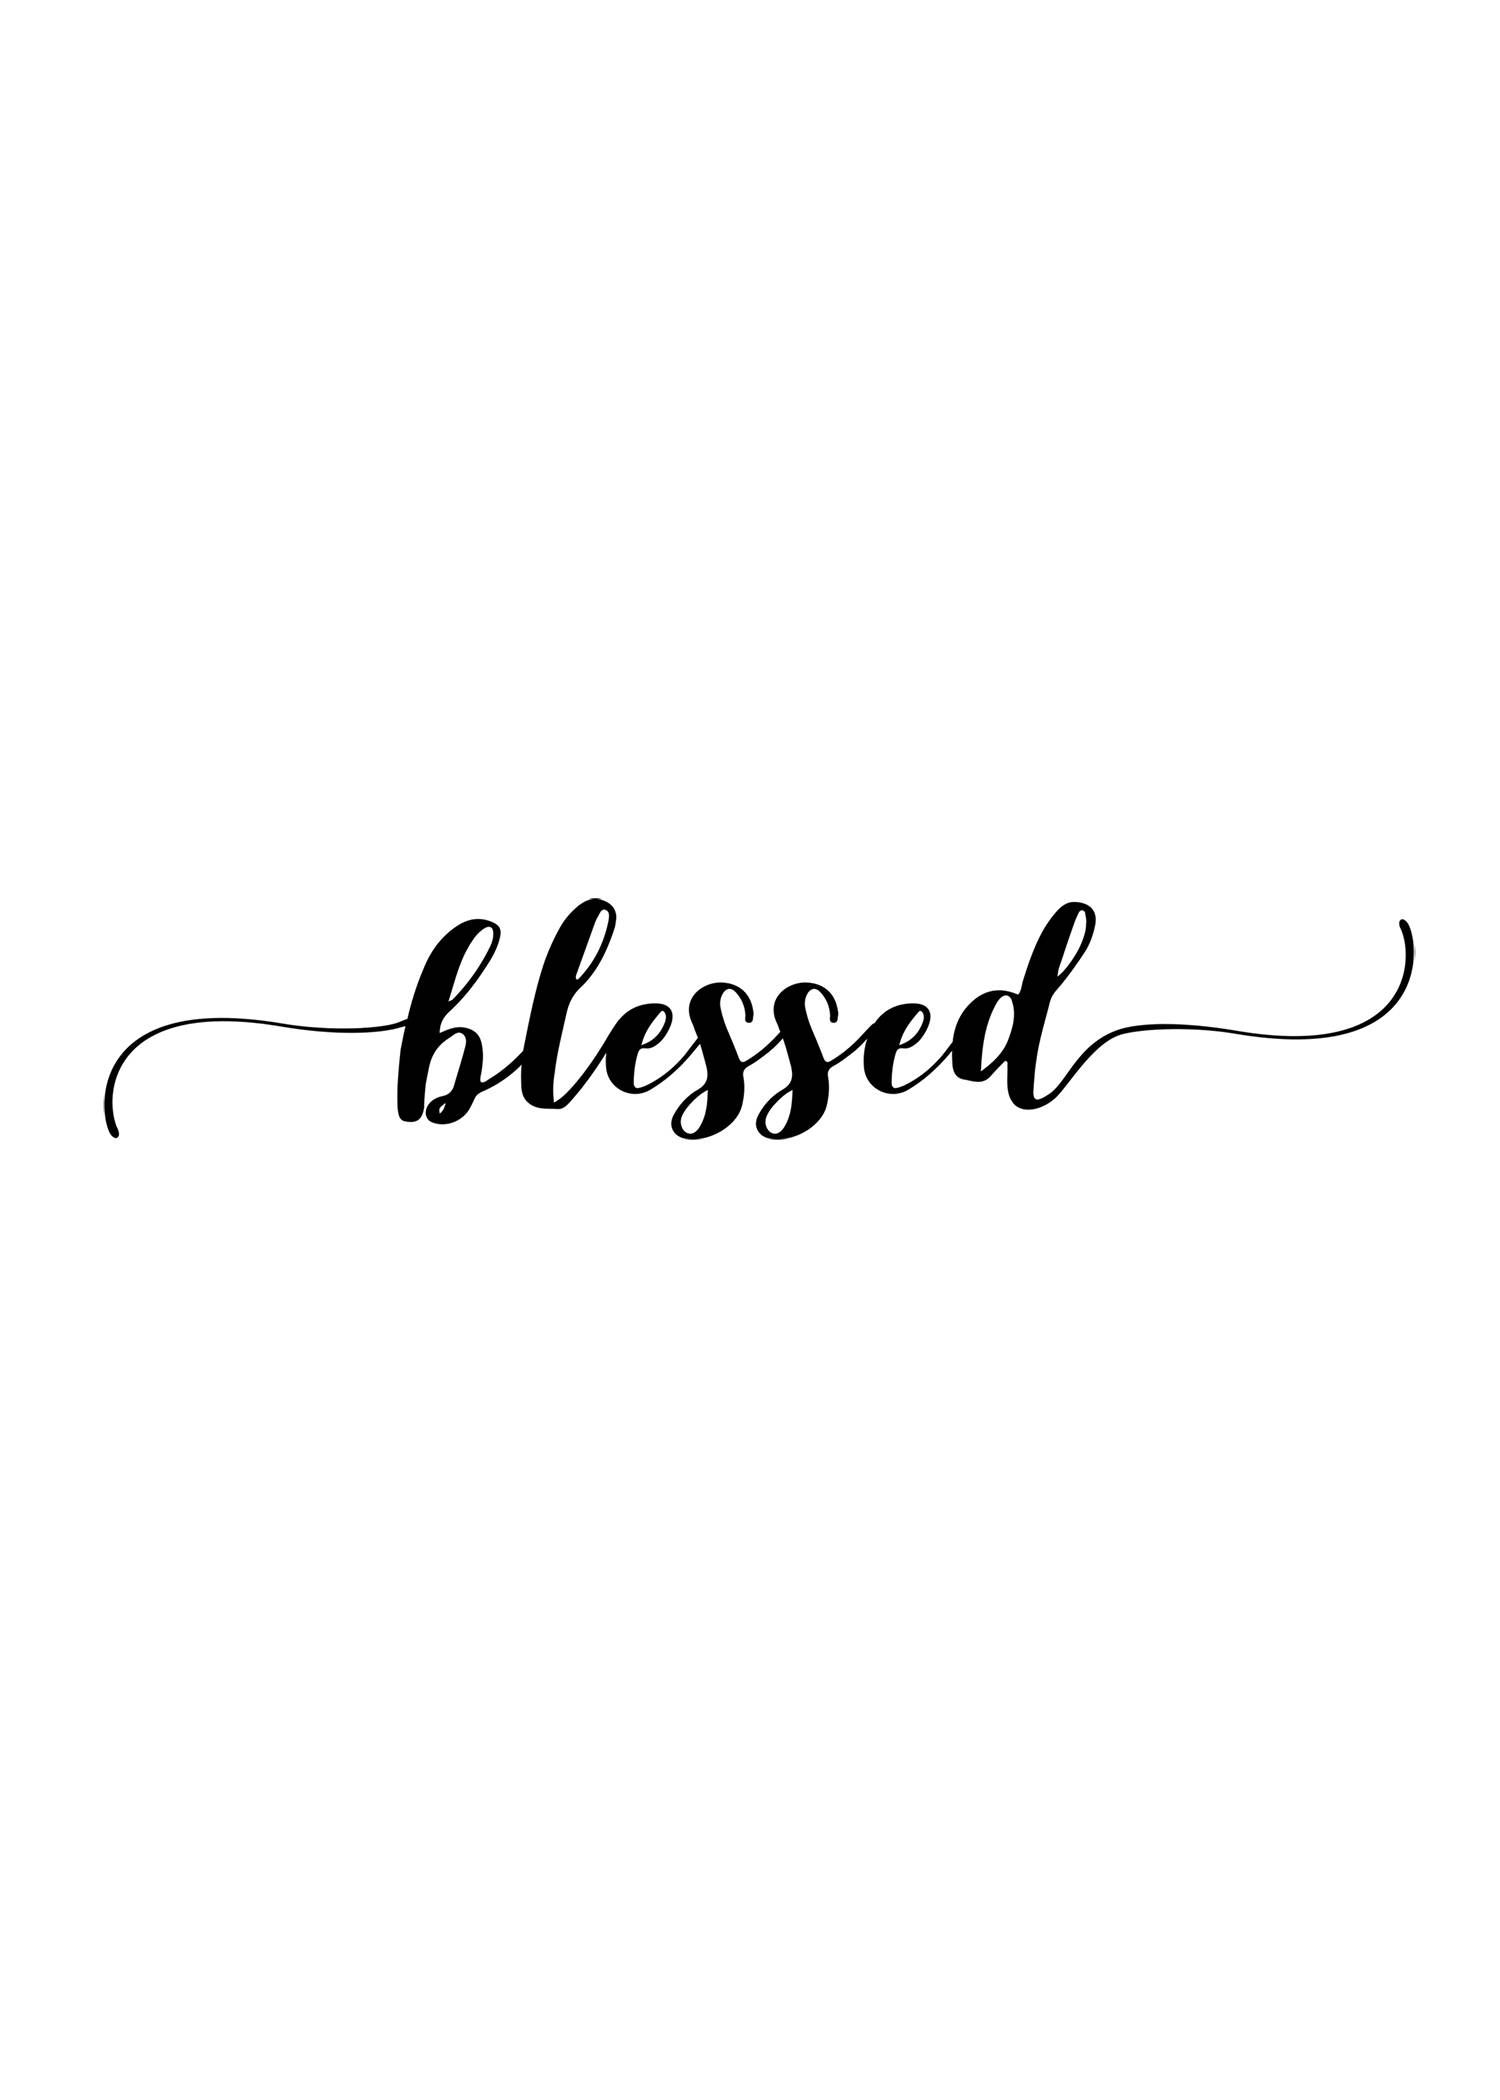 Blessed Digital Print Instant Download Inspirational - Calligraphy , HD Wallpaper & Backgrounds